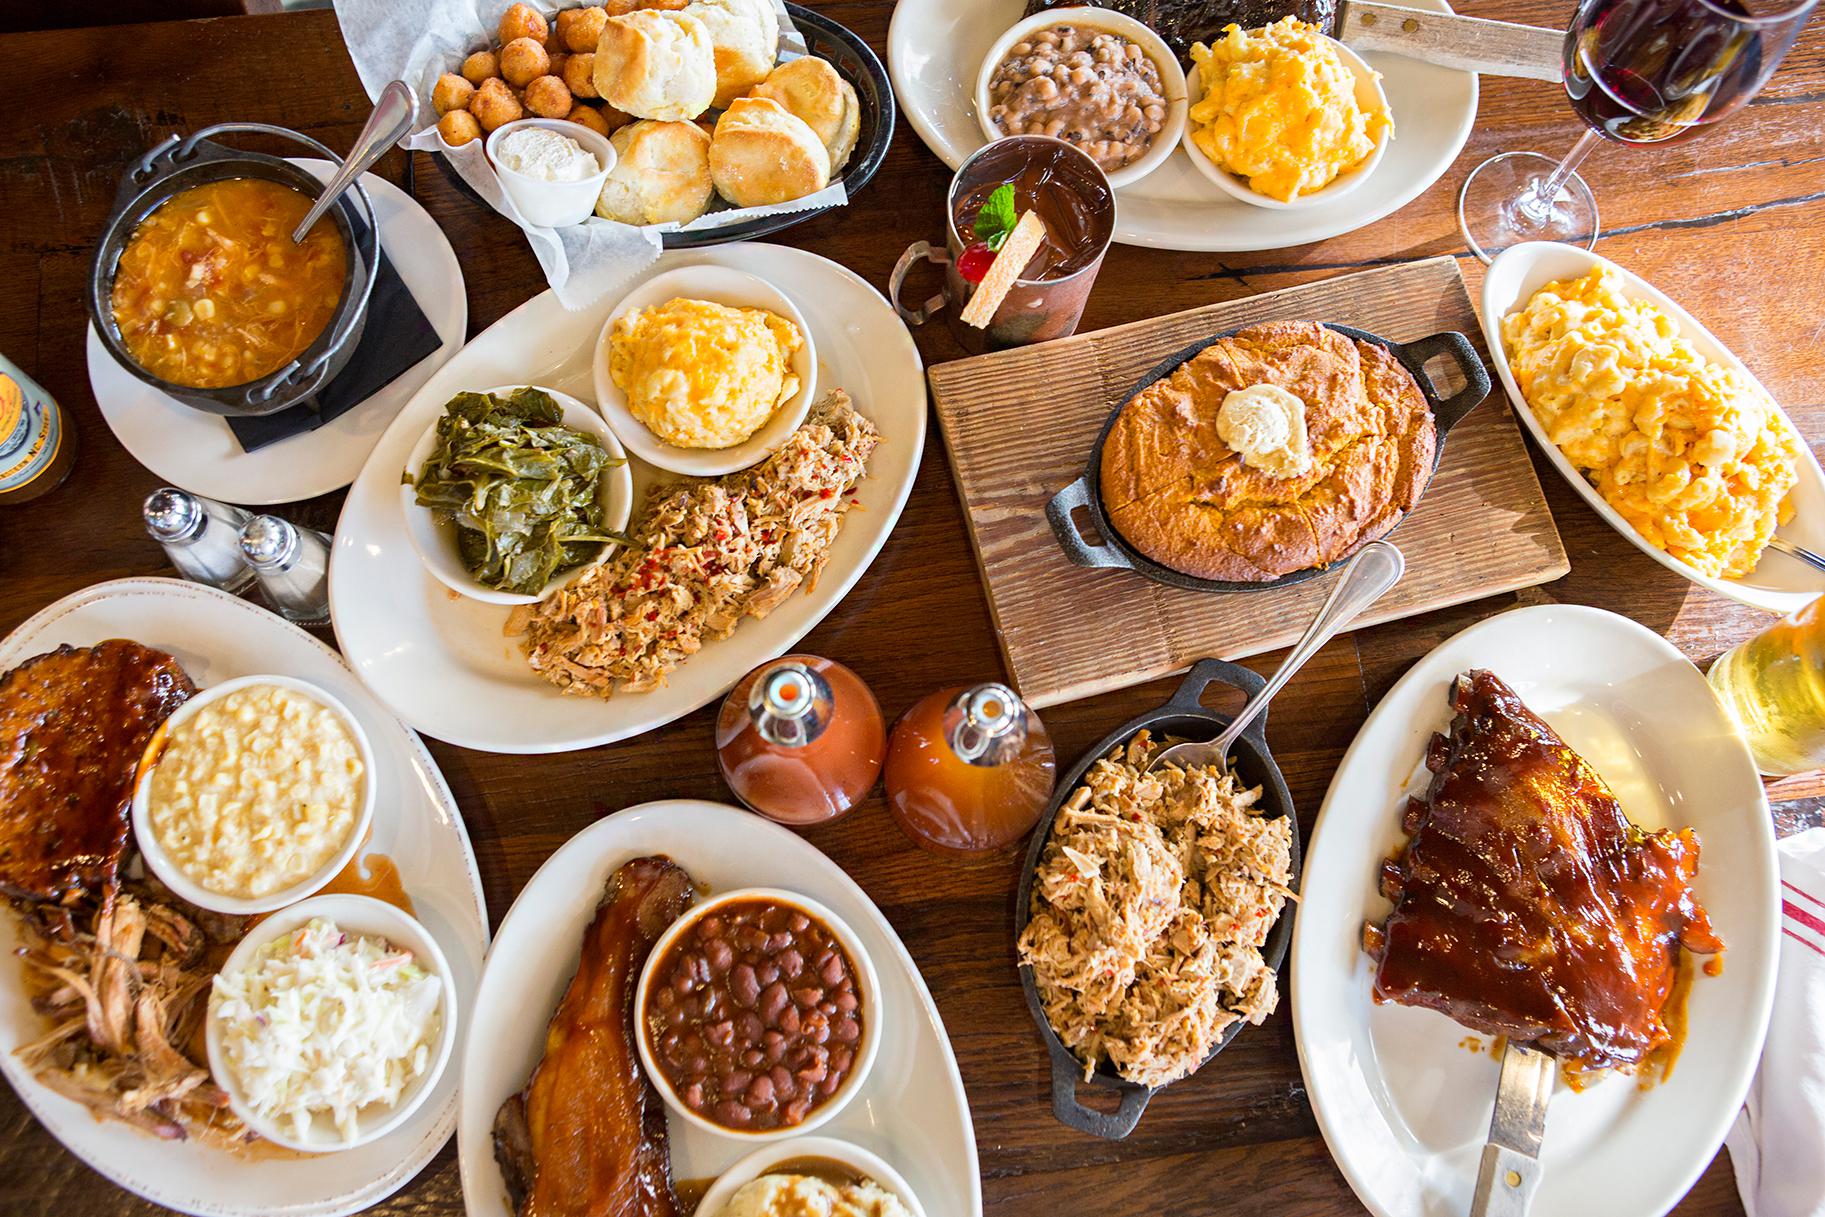 Cj S Southern Kitchen To Open In Grapevine